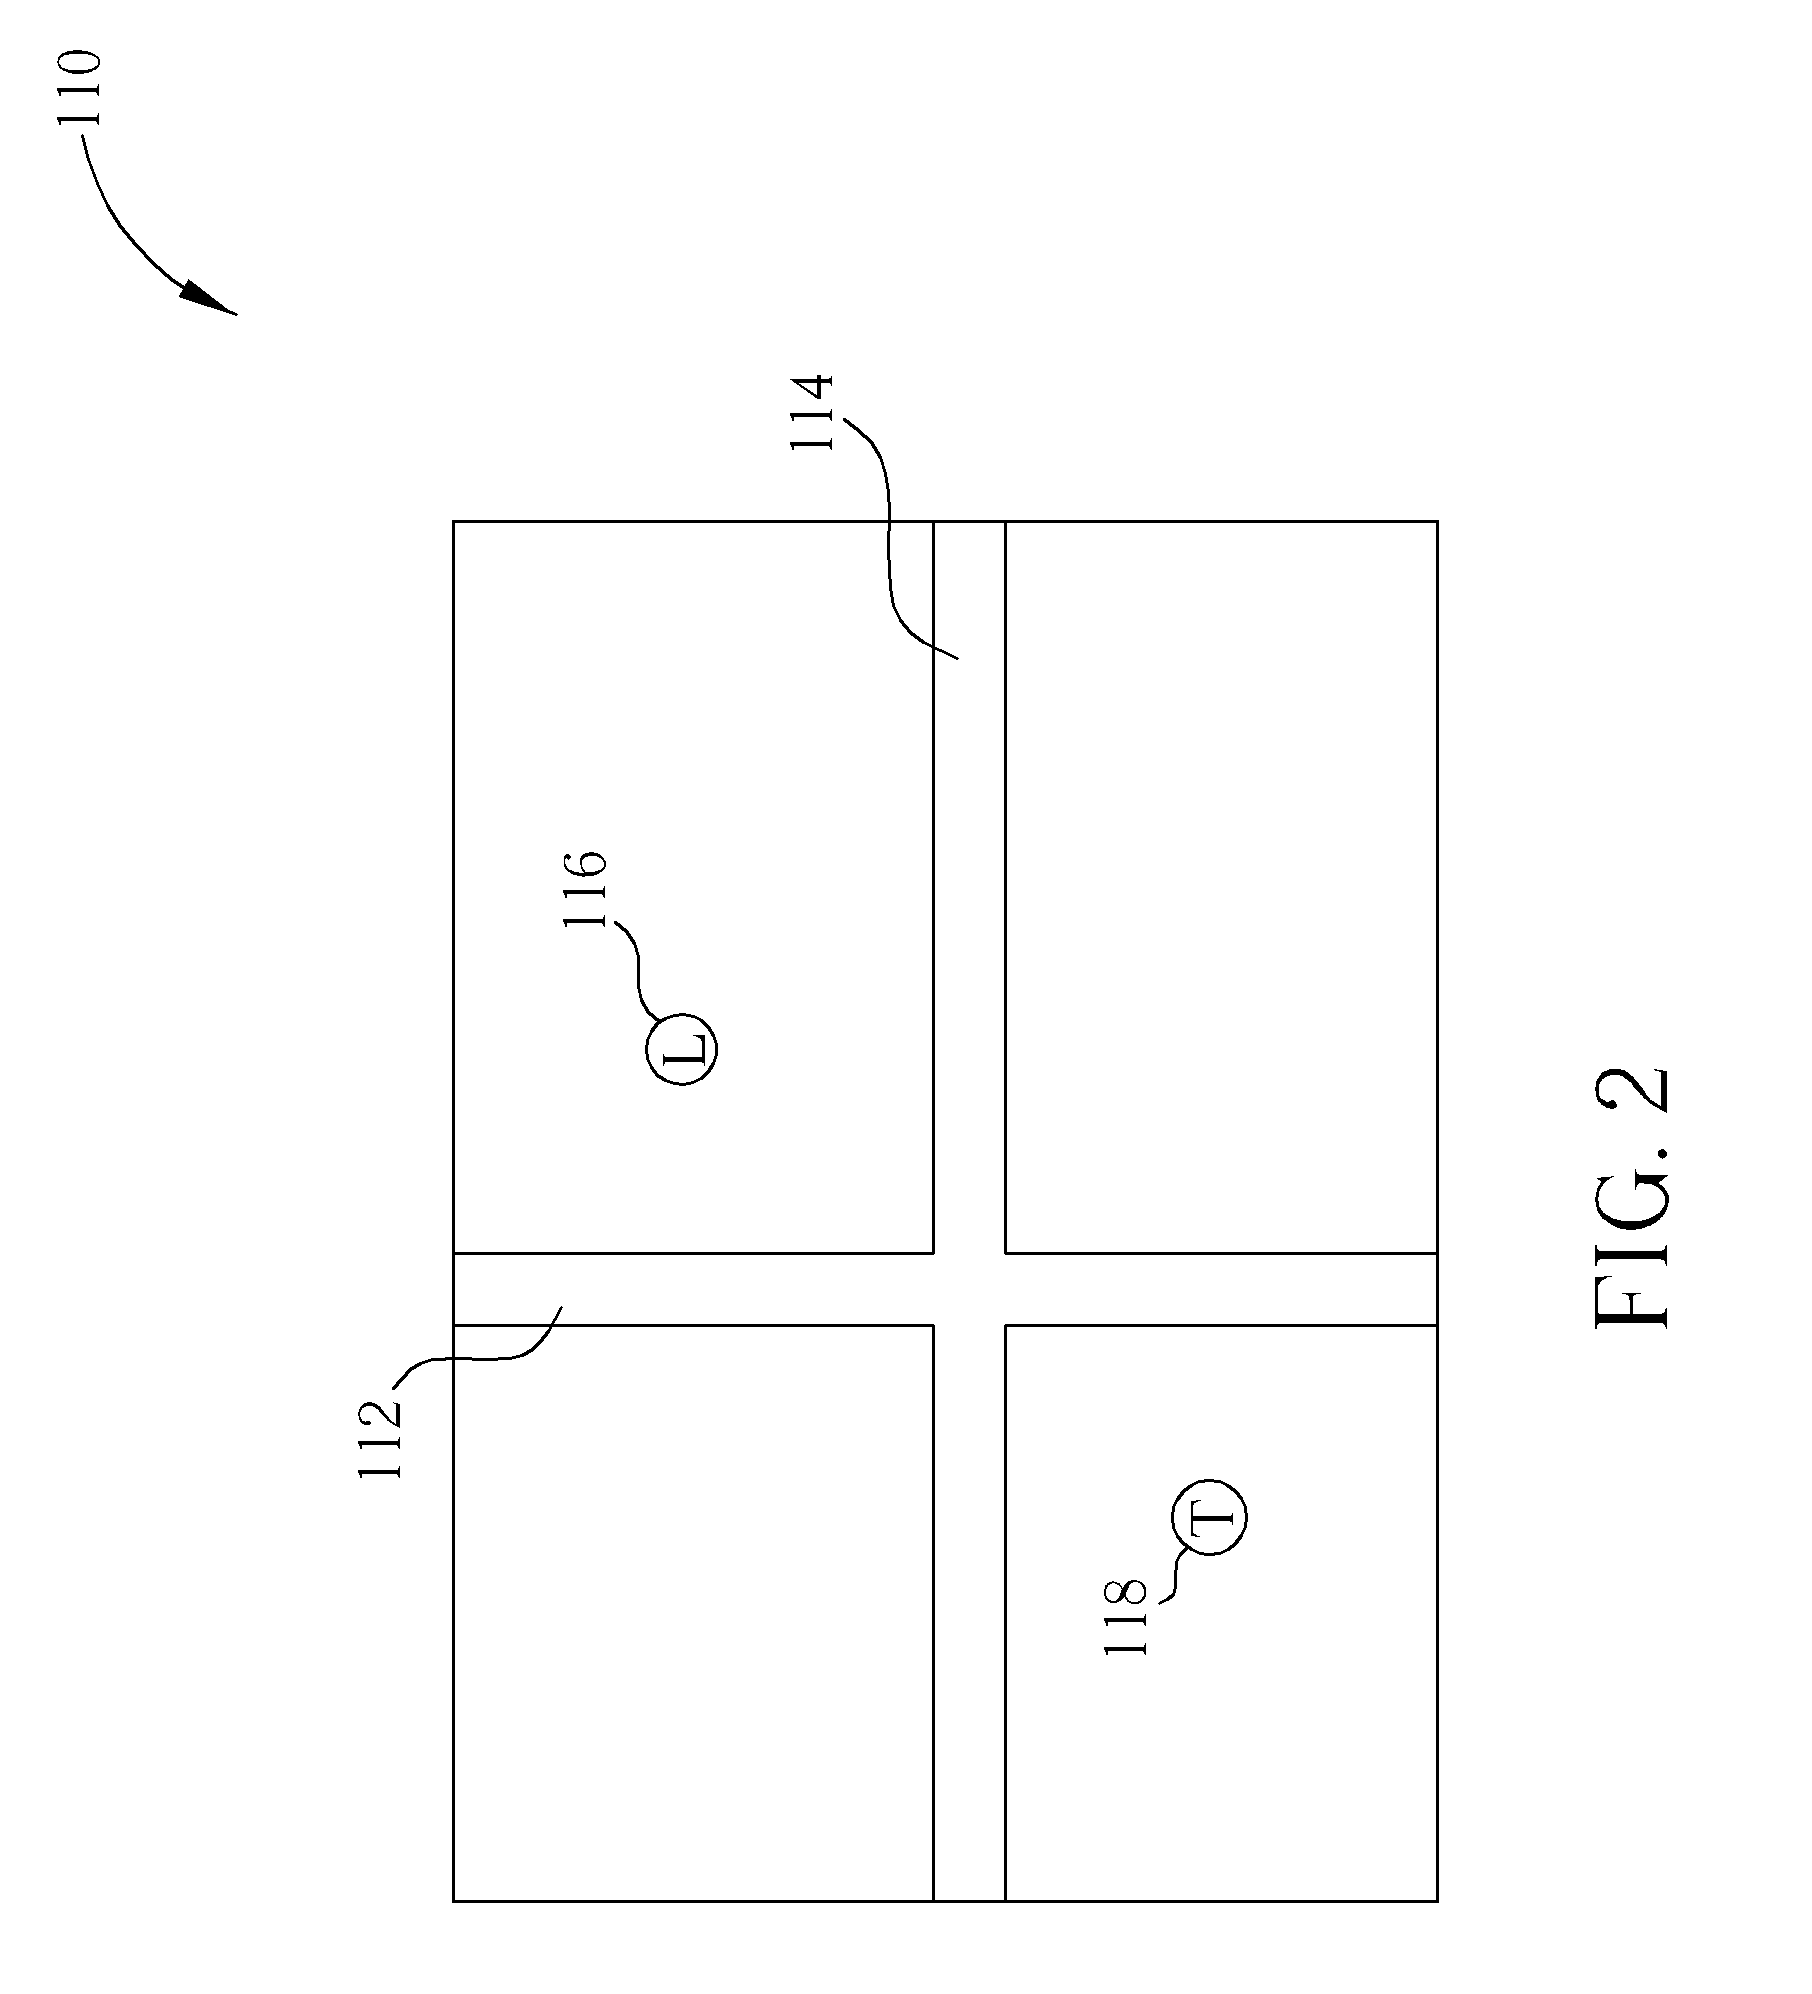 Method of displaying multiple points of interest on a personal navigation device